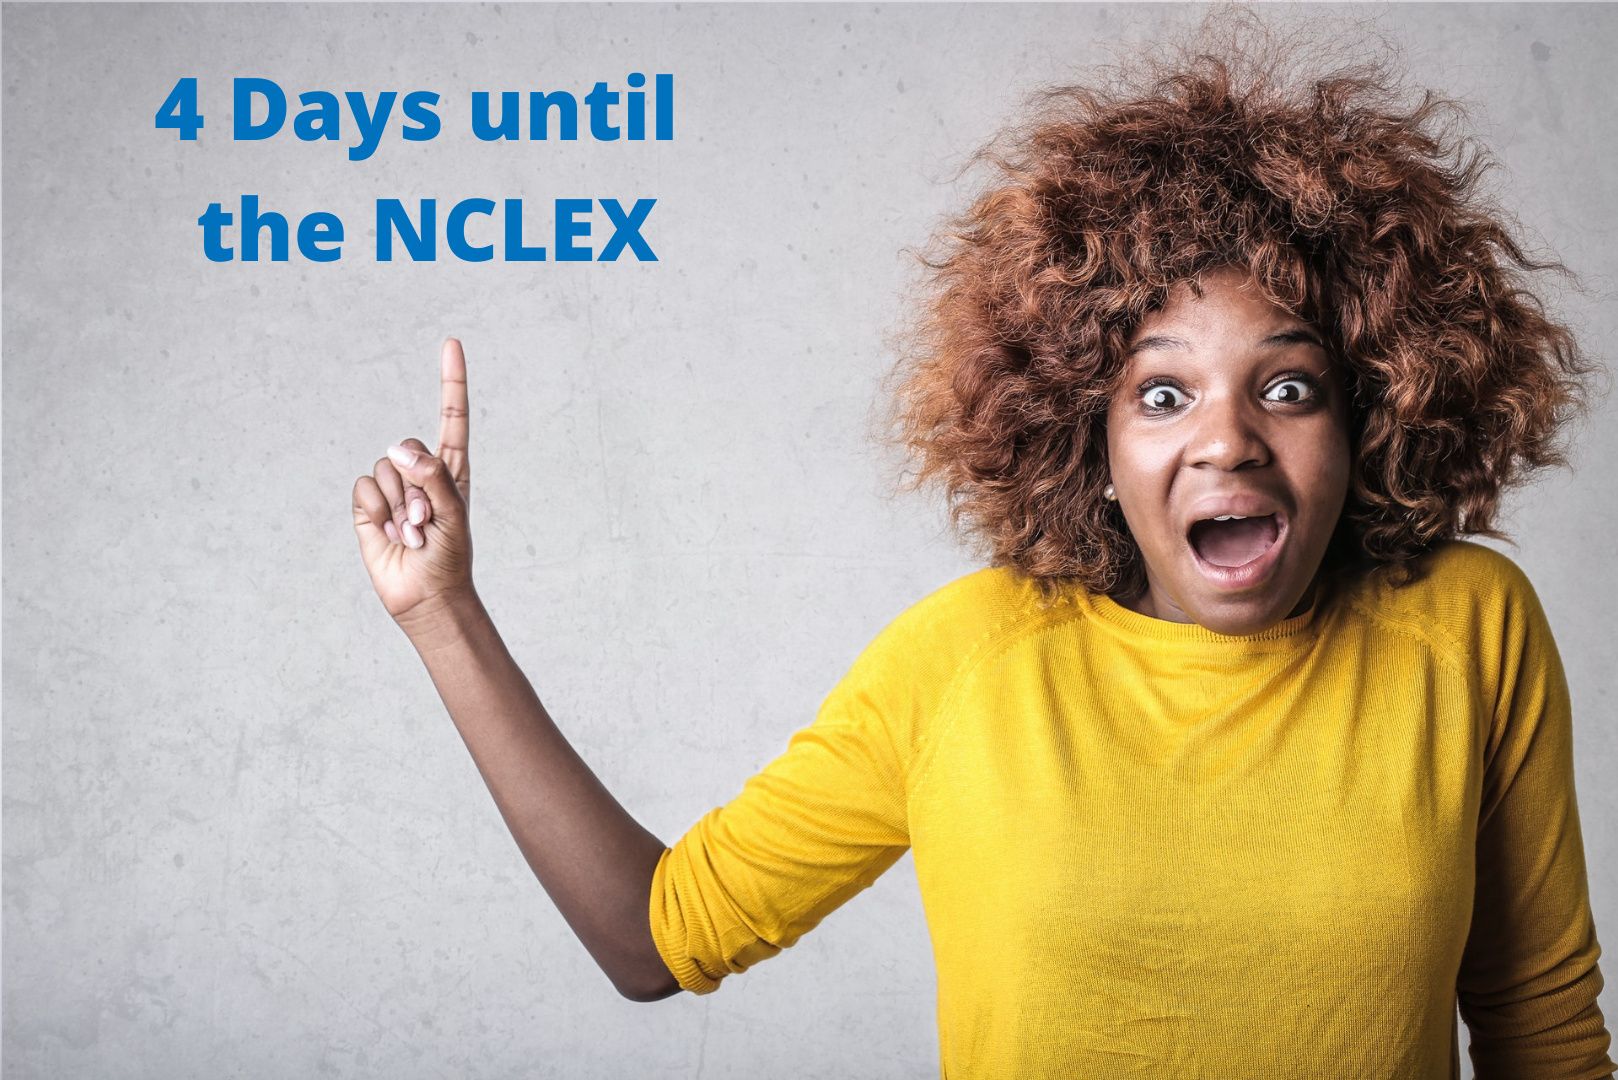 Girl counting down until NCLEX exam